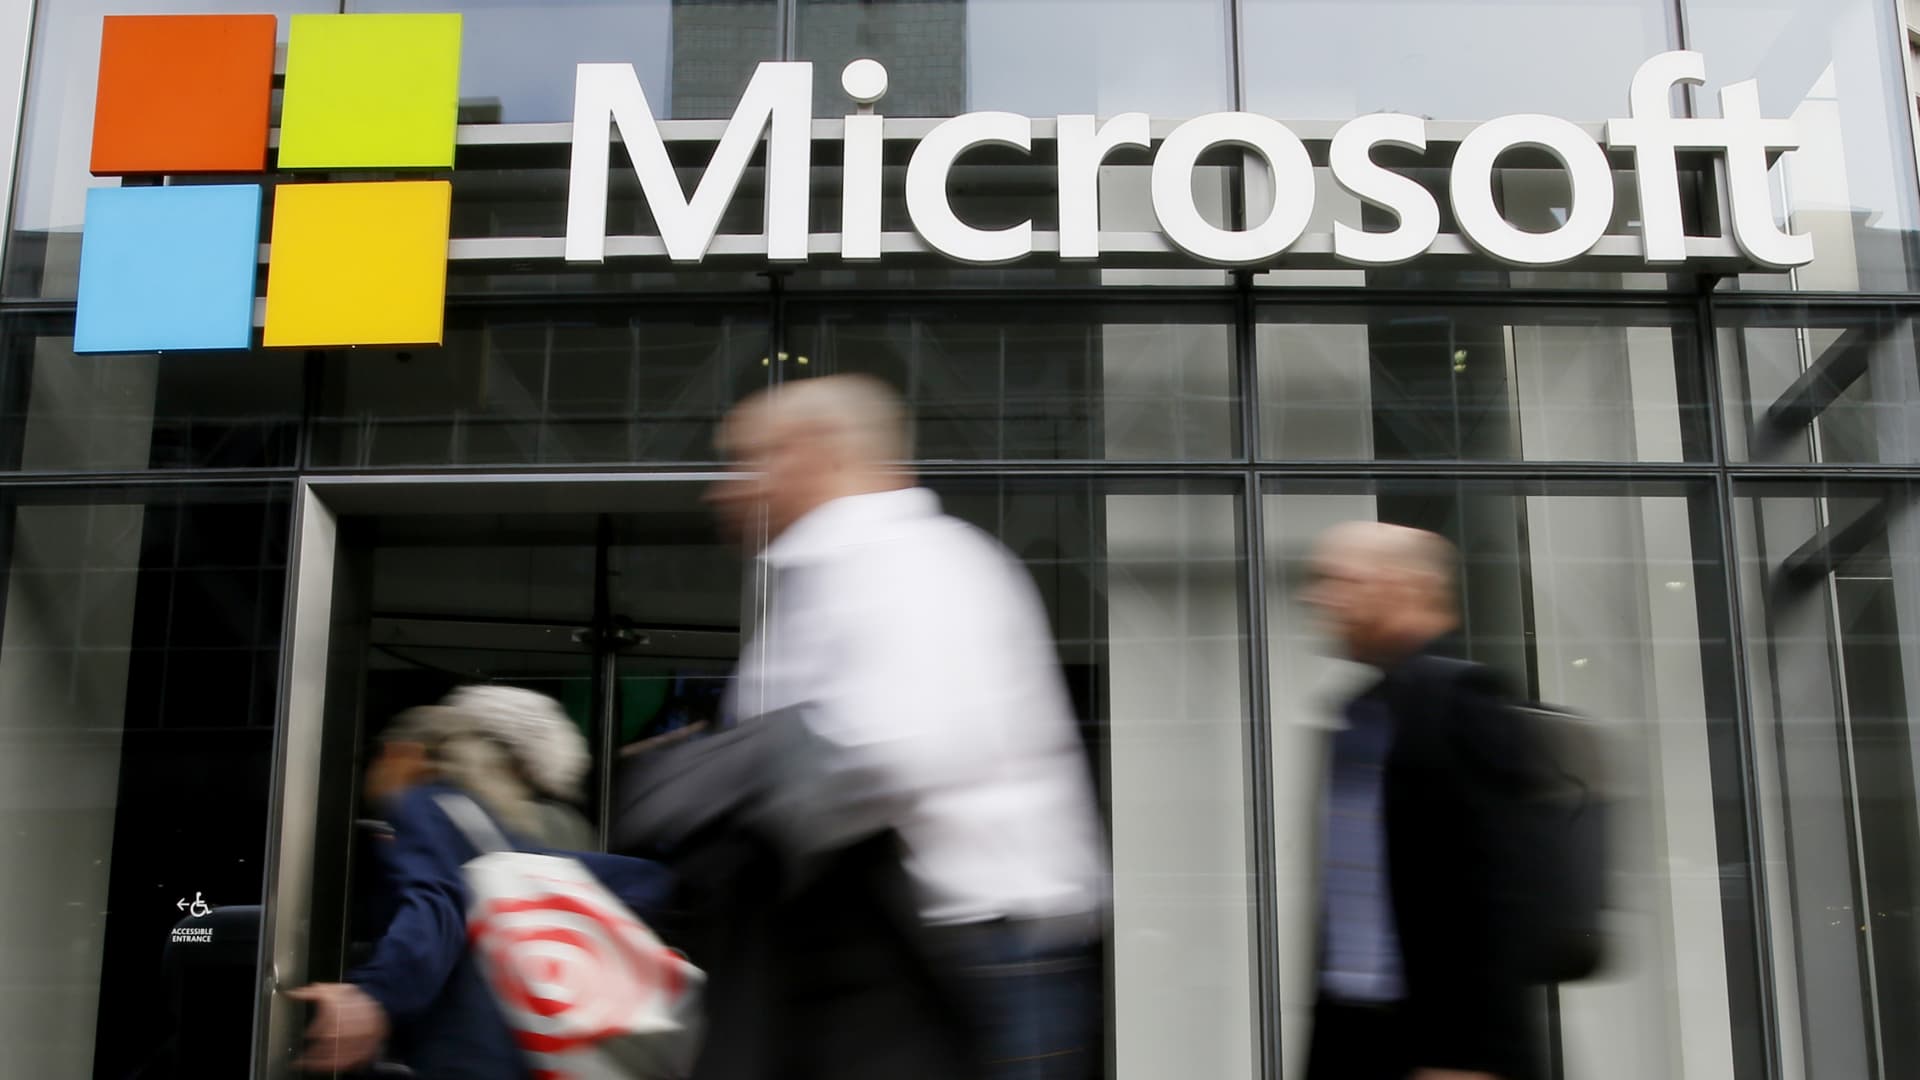 Jim Cramer's top 8 things to watch in the market Wednesday: Microsoft, 3M, Boeing earnings